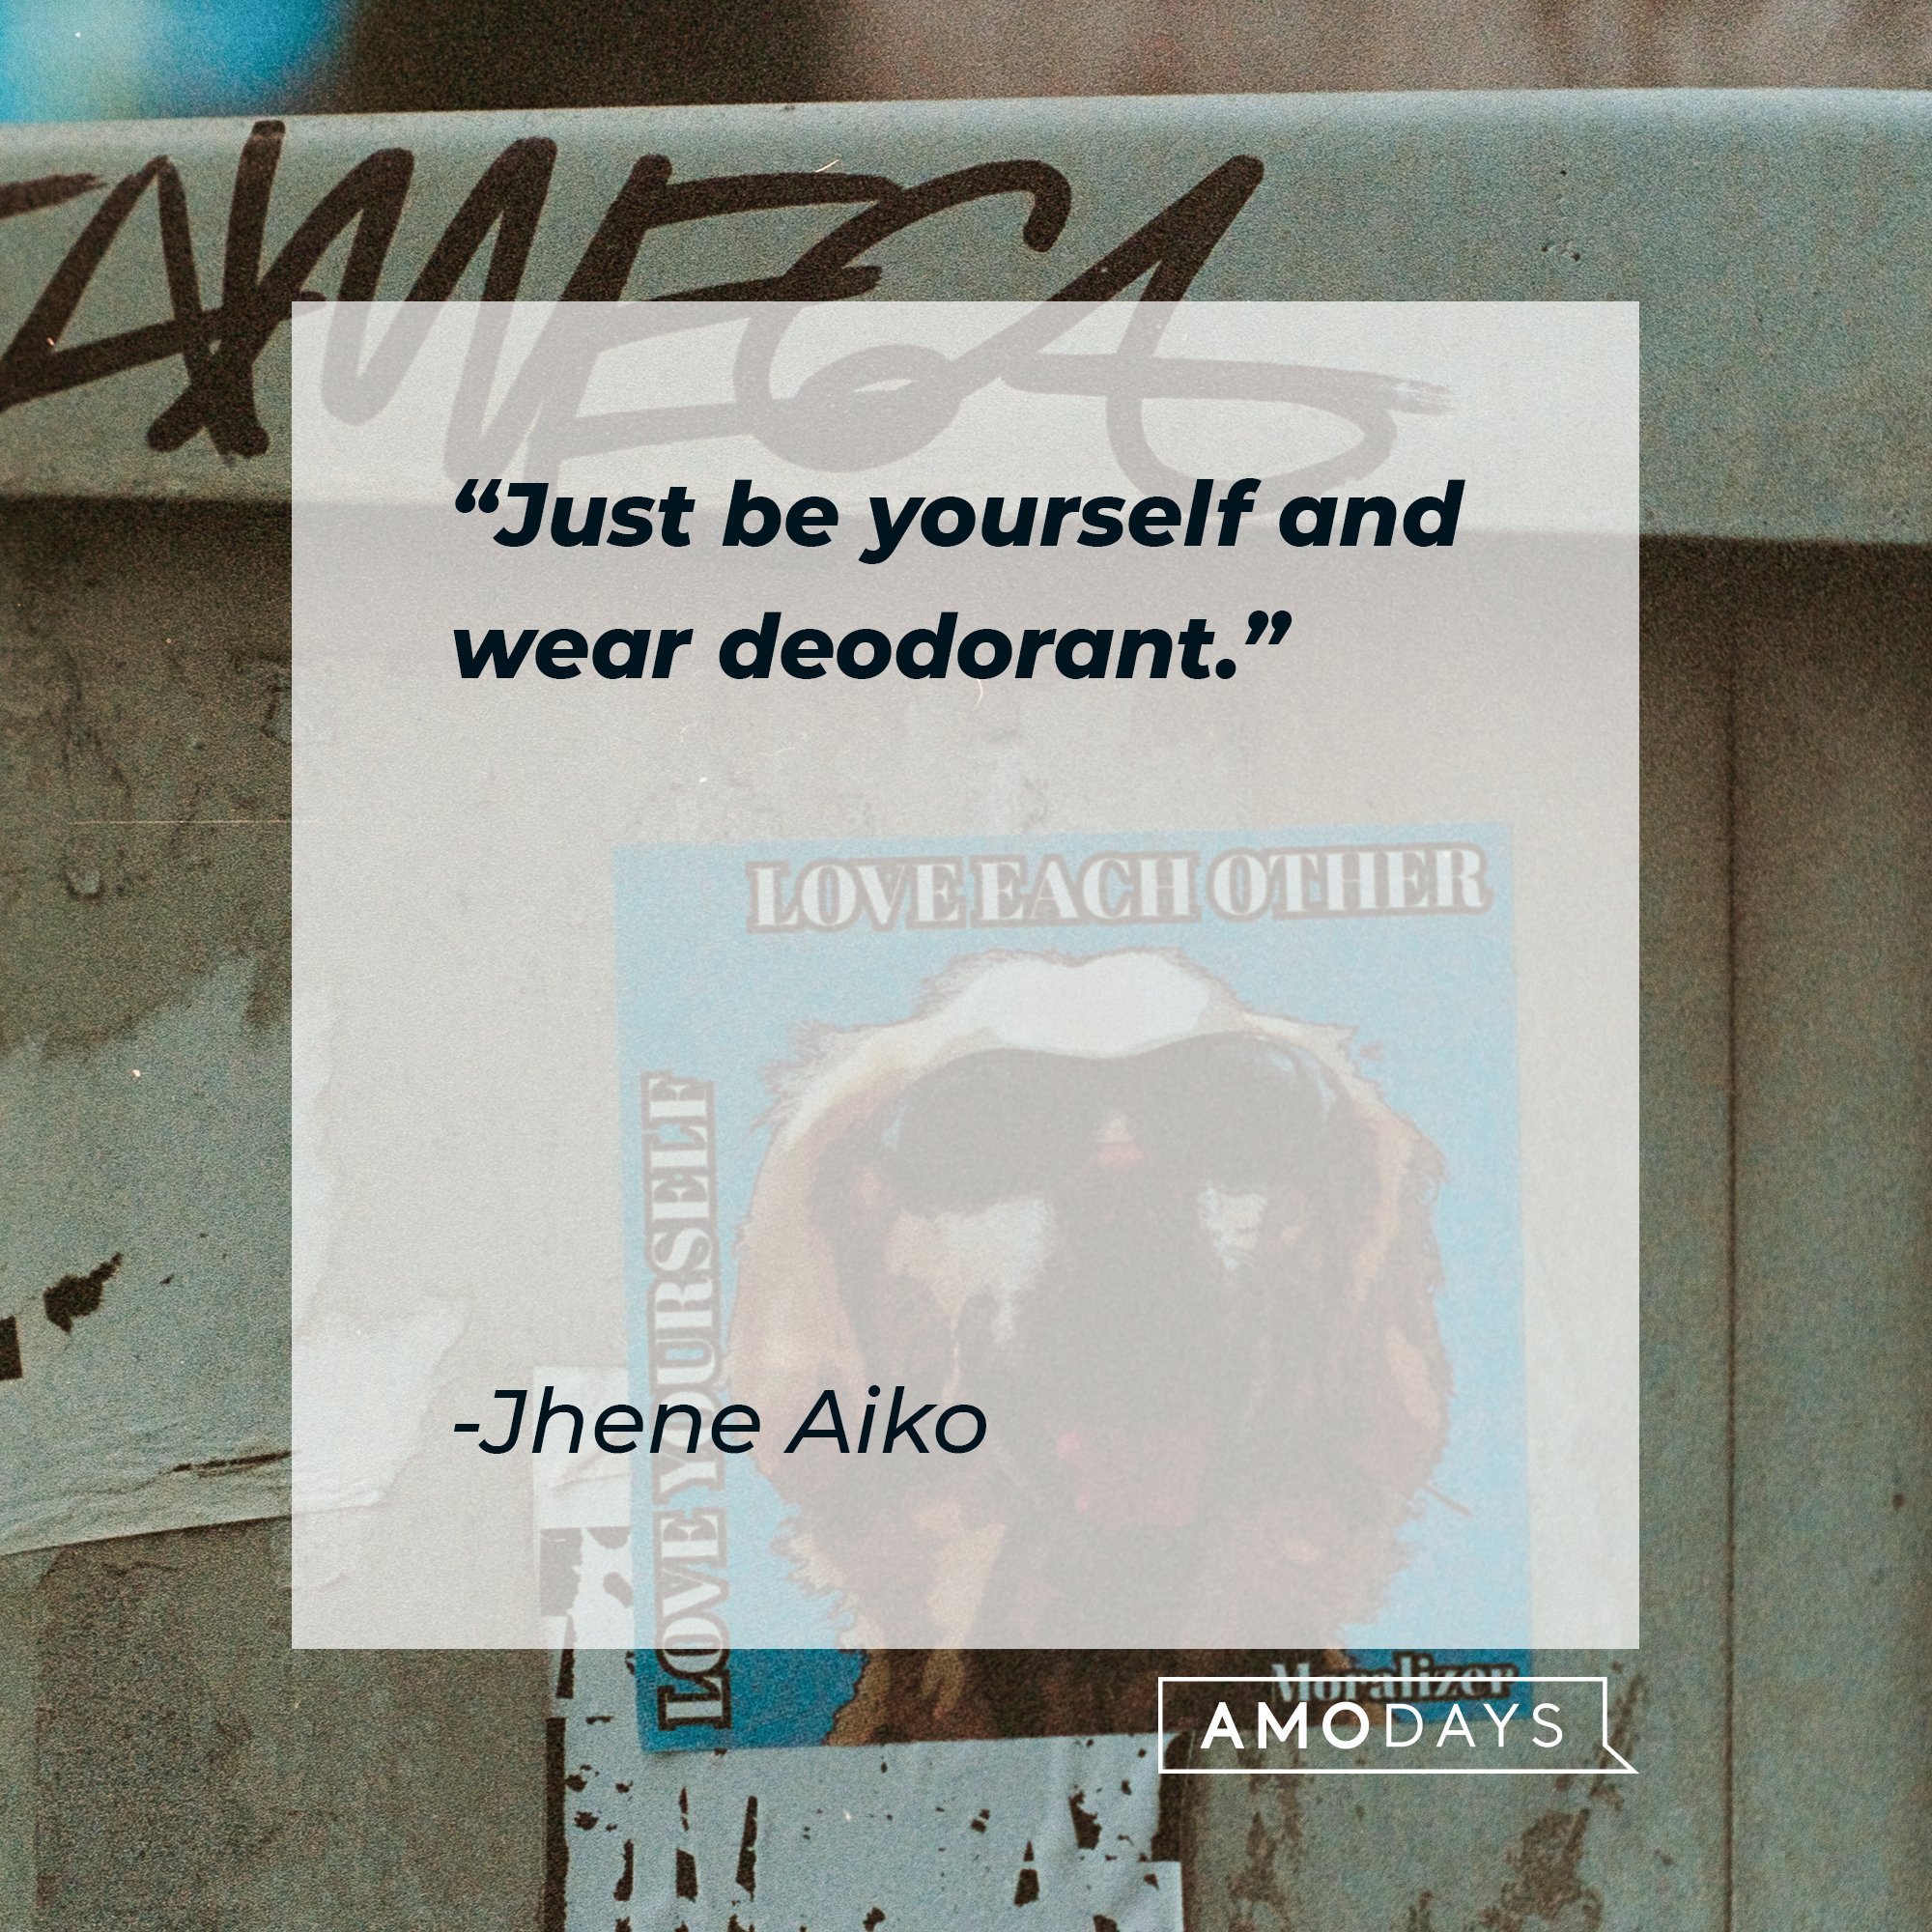  Jhene Aiko's quote: "Just be yourself and wear deodorant." | Image: AmoDays